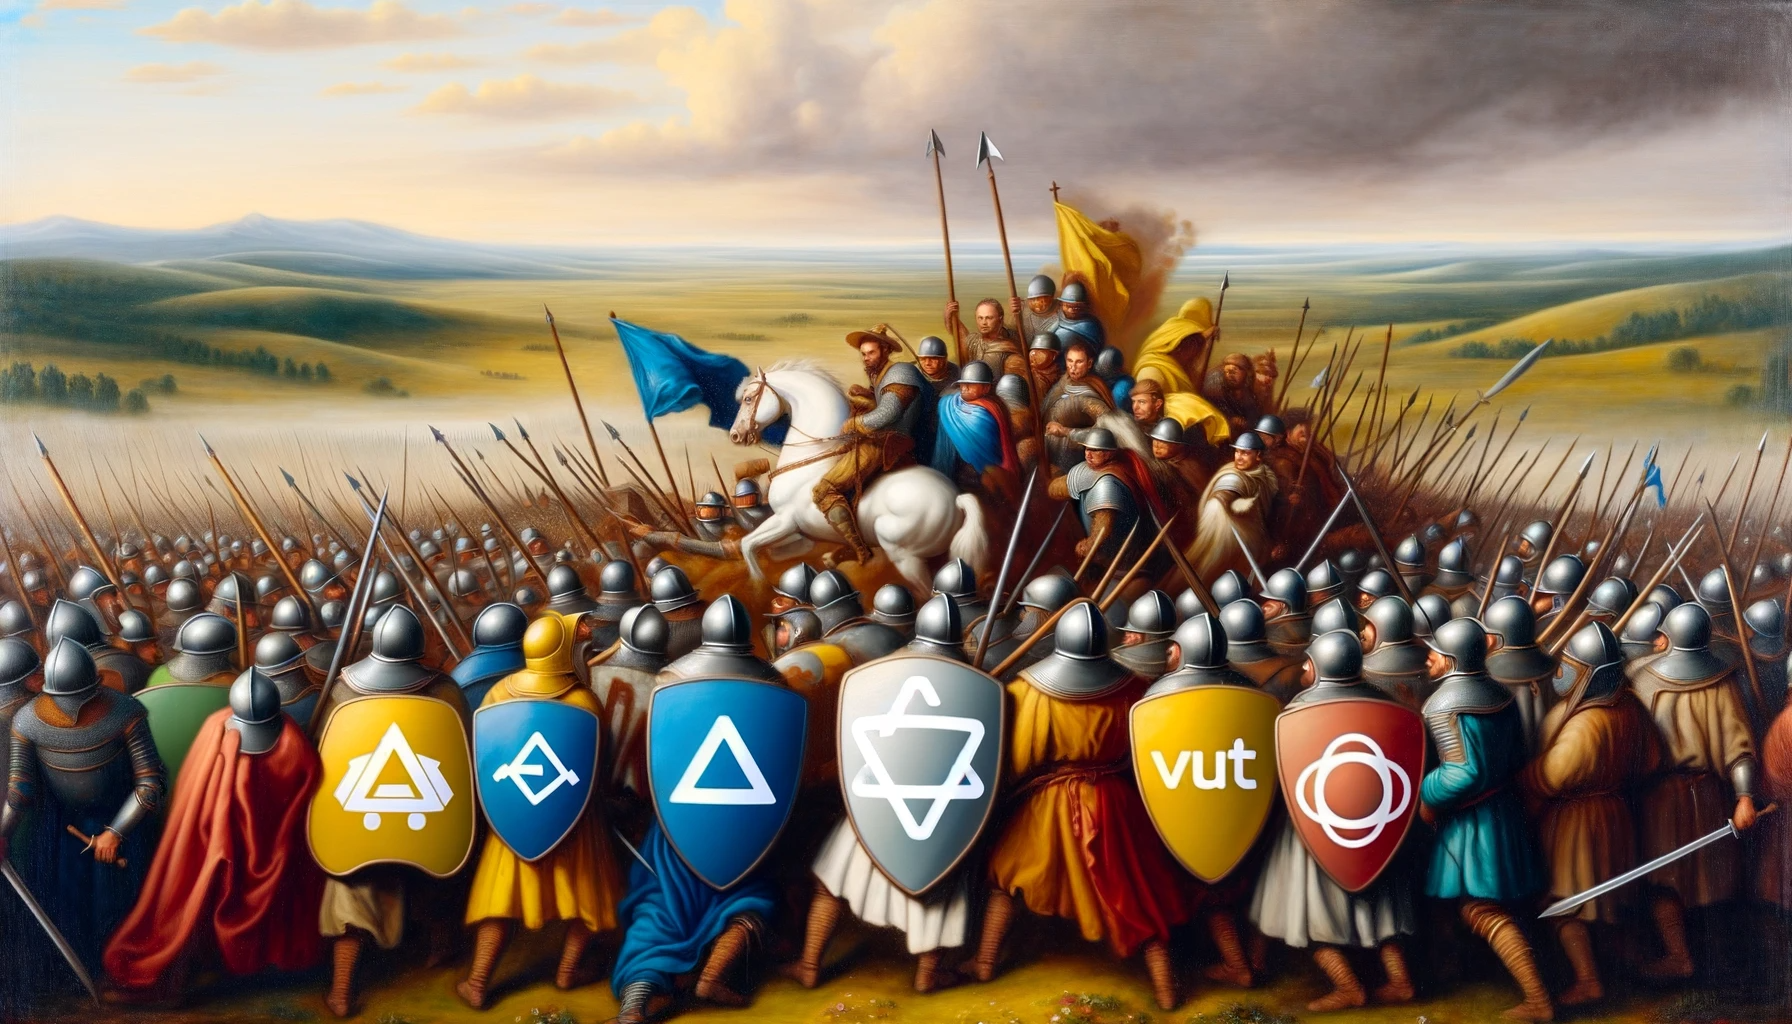 Landscape-oriented image in the style of an oil painting from the Renaissance period, depicting "The Battle of Frameworks.